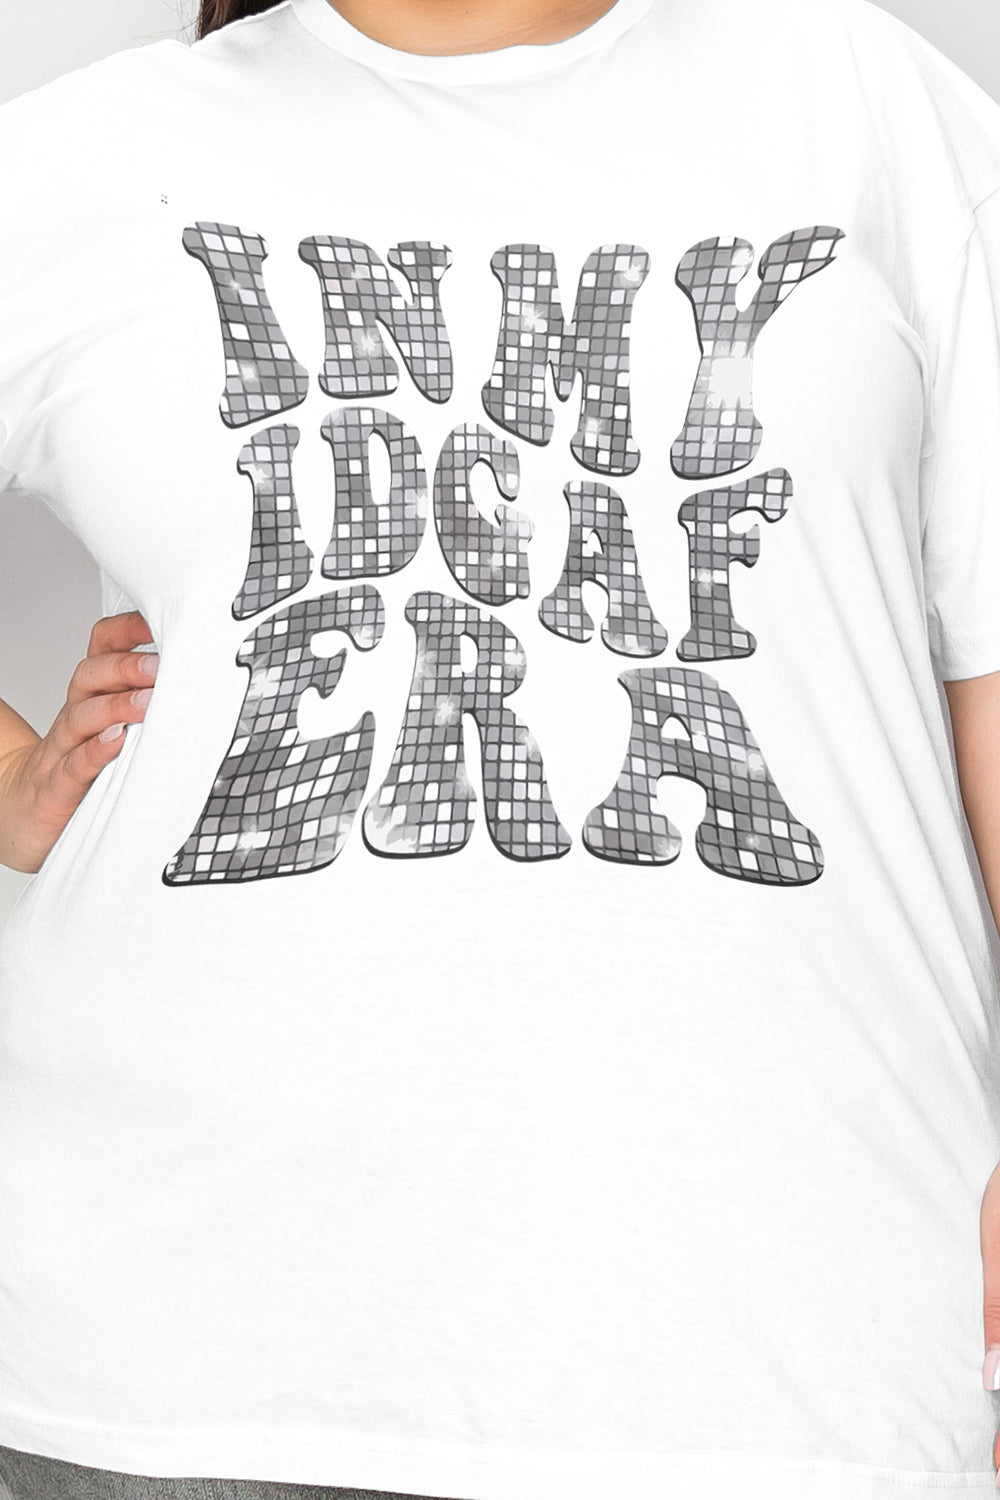 Simply Love Full Size IN MY IDGAF ERA Graphic T-Shirt Graphic Tees JT's Designer Fashion